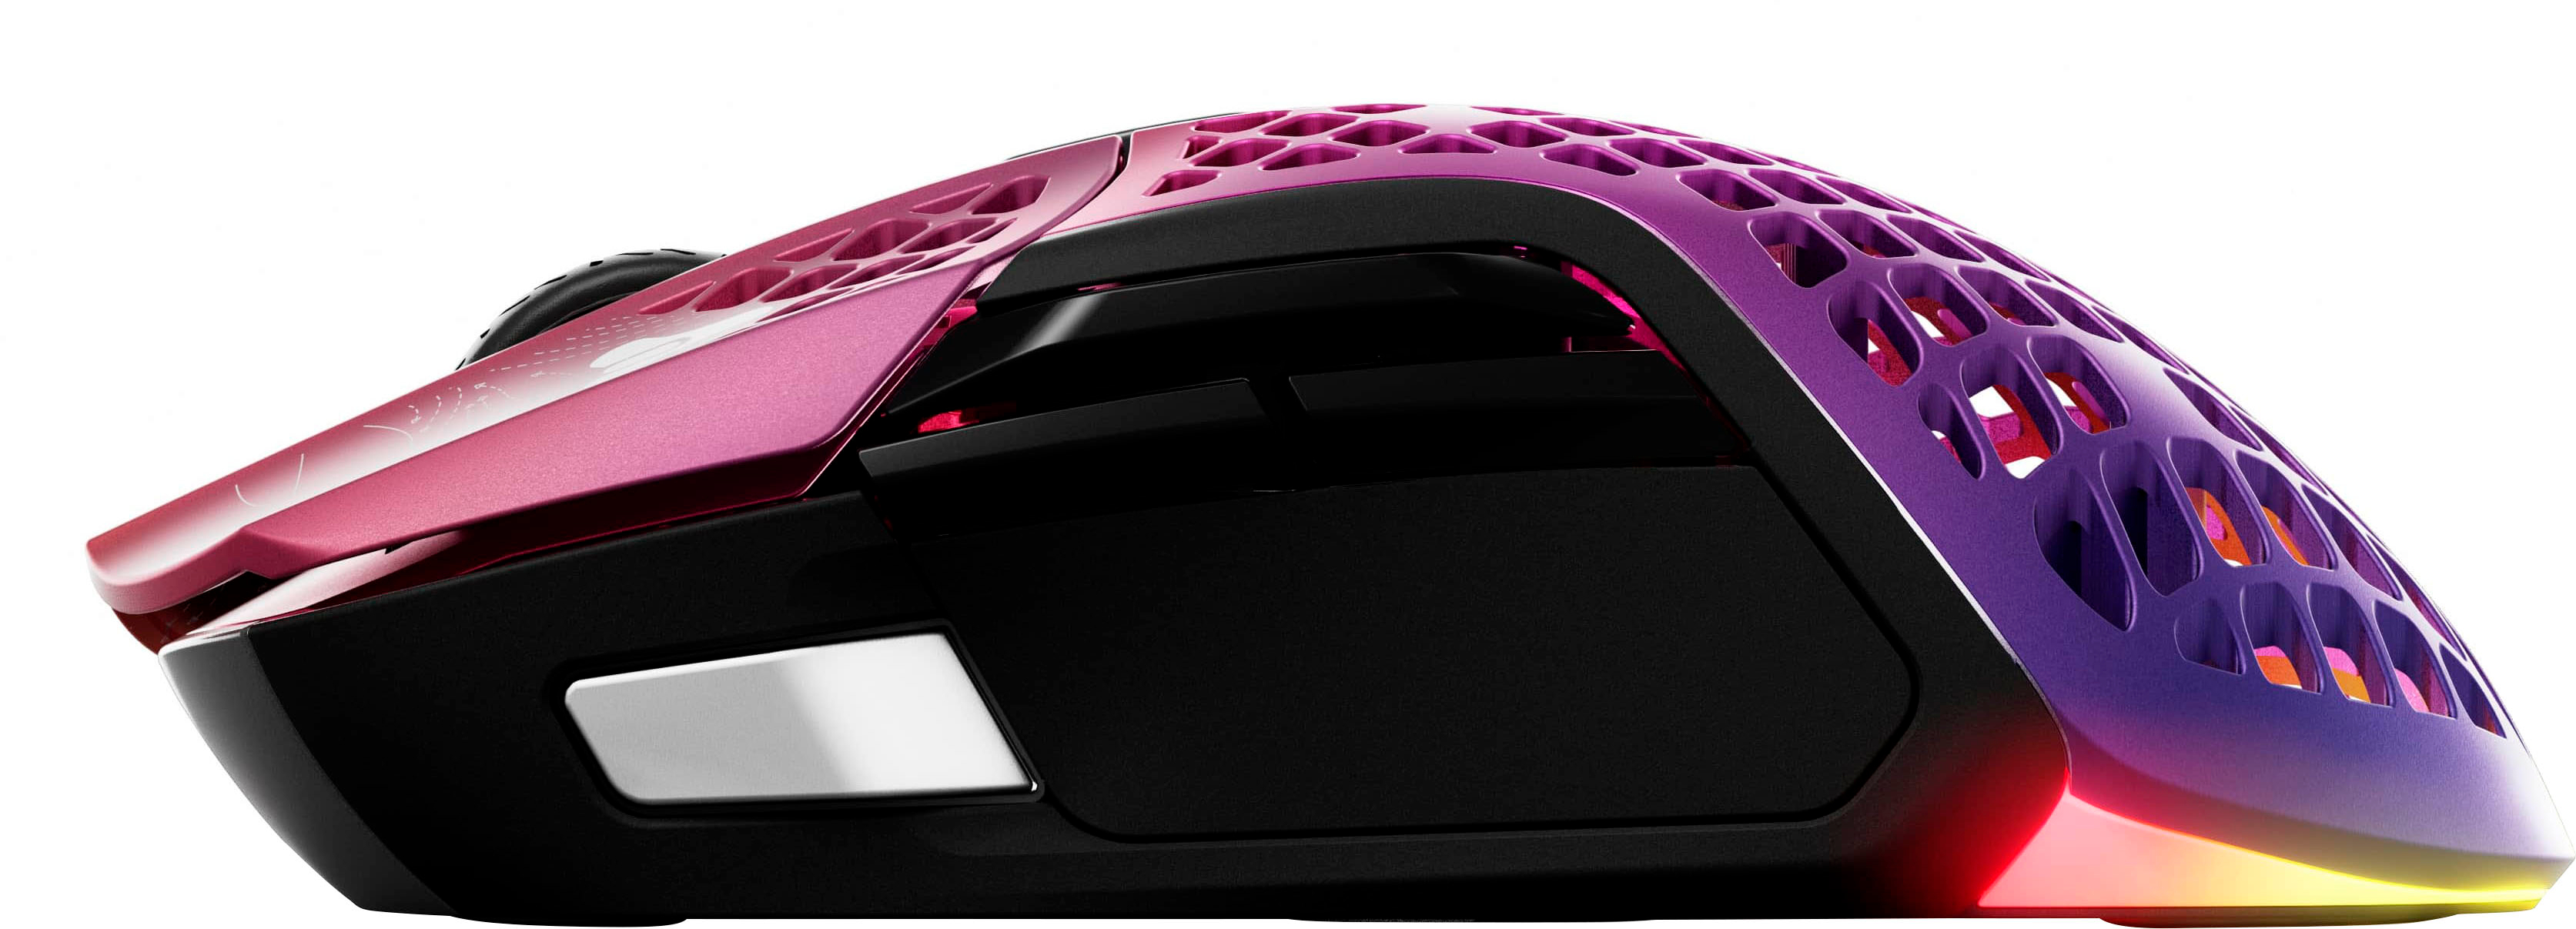 SteelSeries Aerox 5 wired gaming mouse review: A hard lesson in